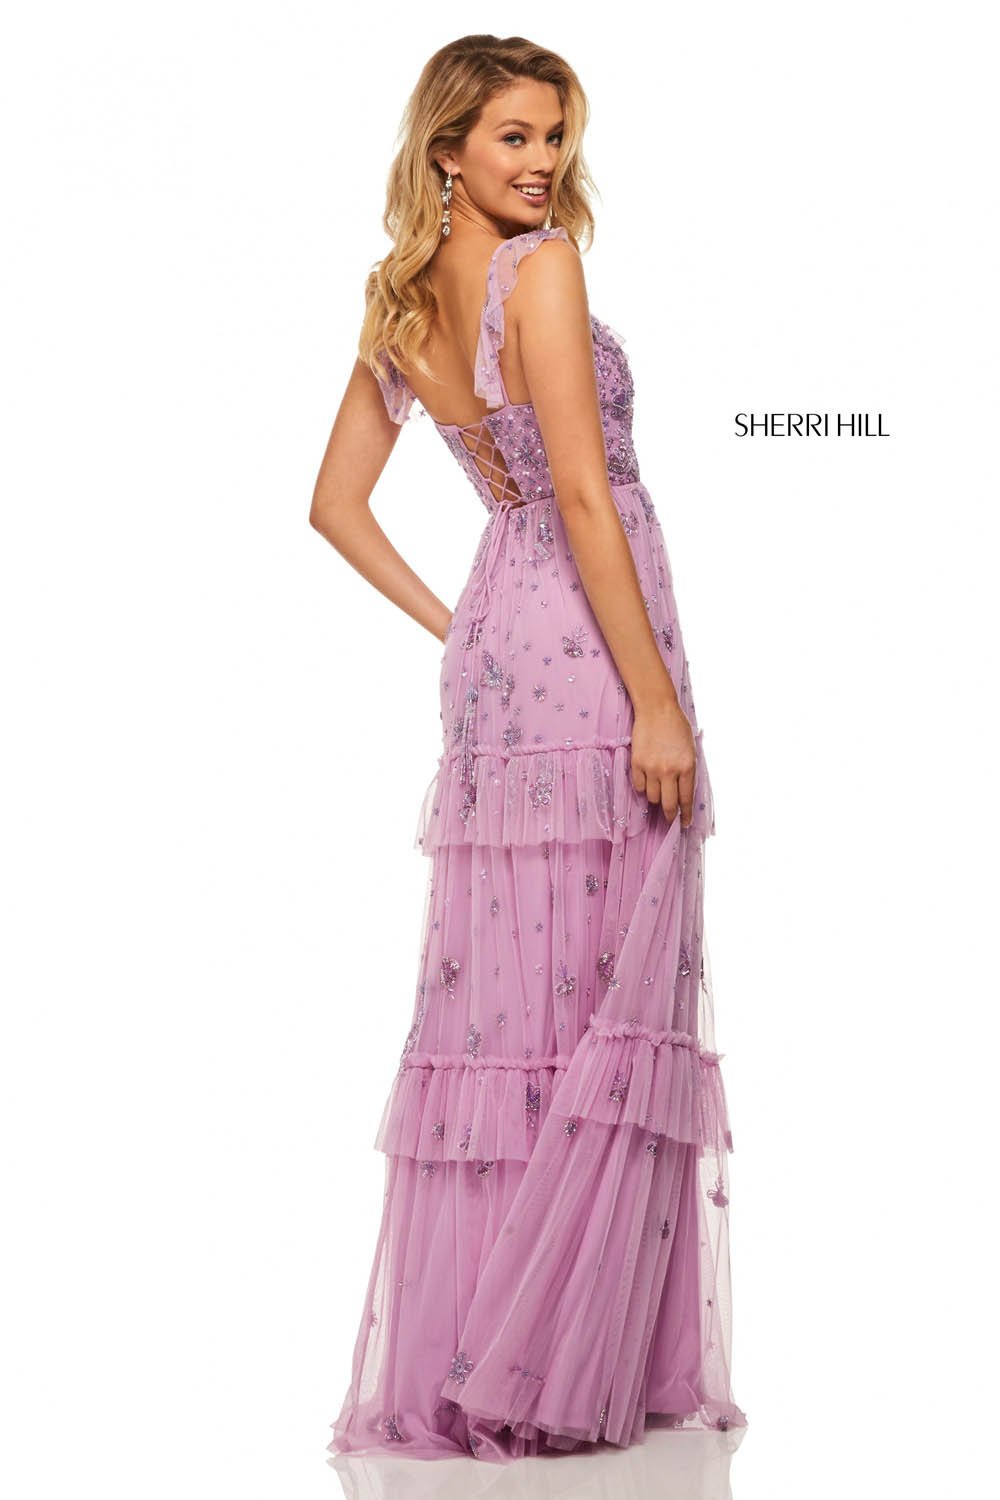 Sherri Hill 52929 dress images in these colors: Lilac.